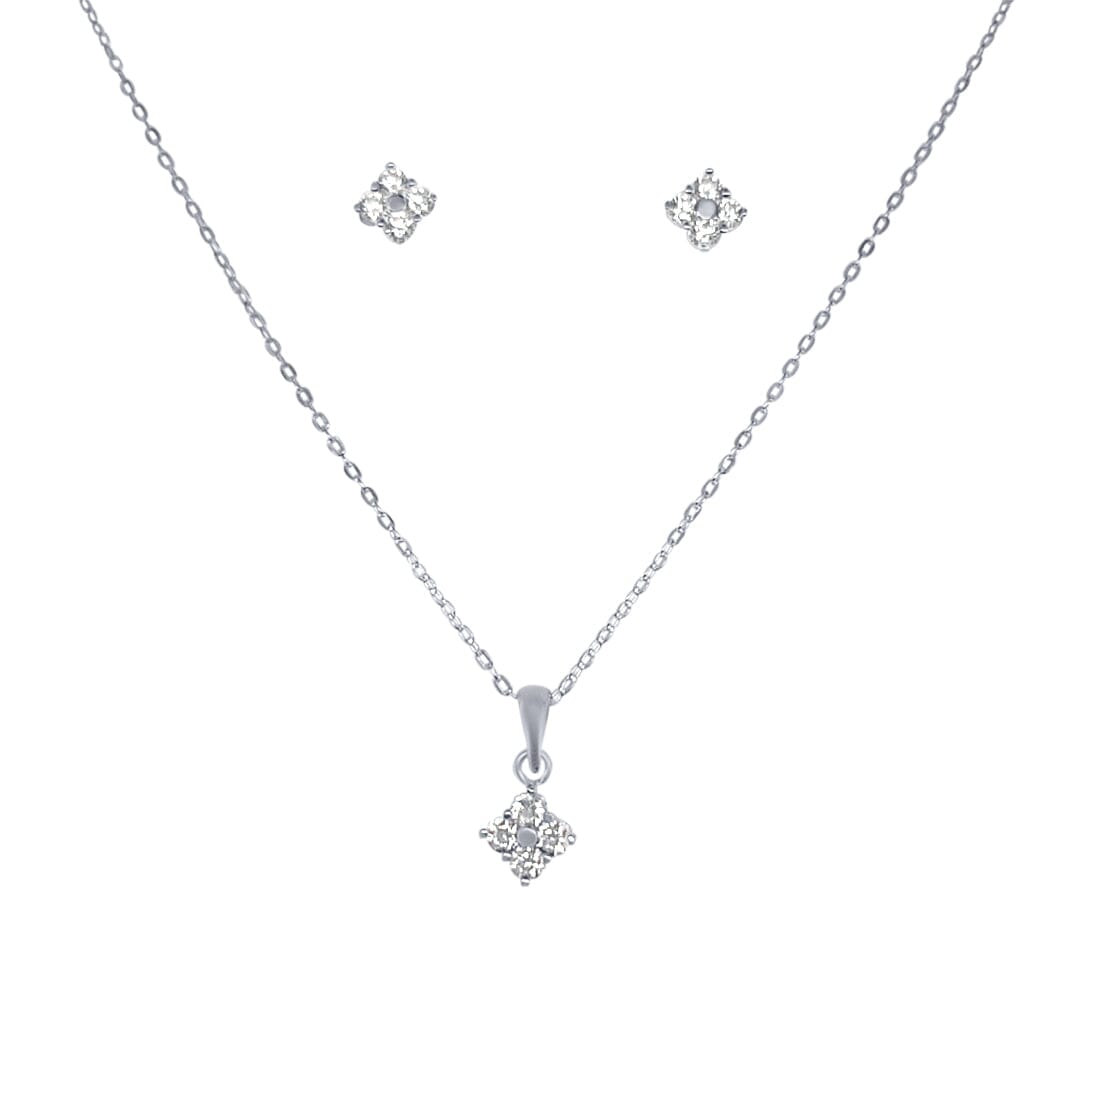 Diamond Shaped Cluster Stud Earrings and Necklace Set with Cubic Zirconia in Sterling Silver Jewellery Sets Bevilles 